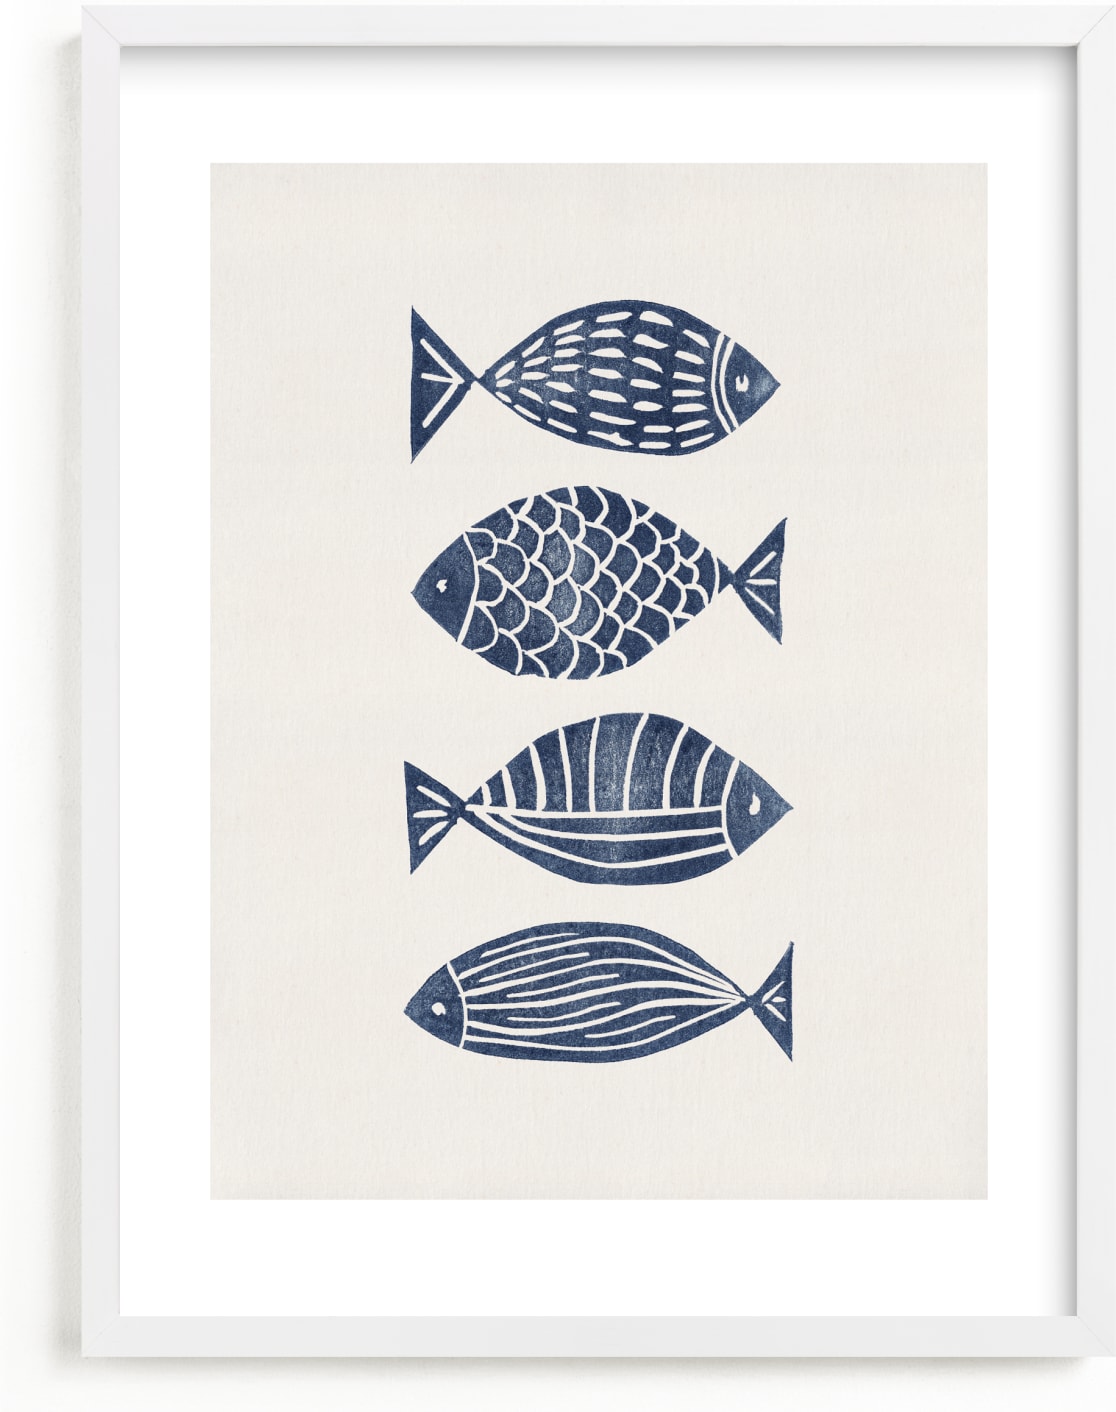 This is a blue kids wall art by Alisa Galitsyna called Linocut Fishes.